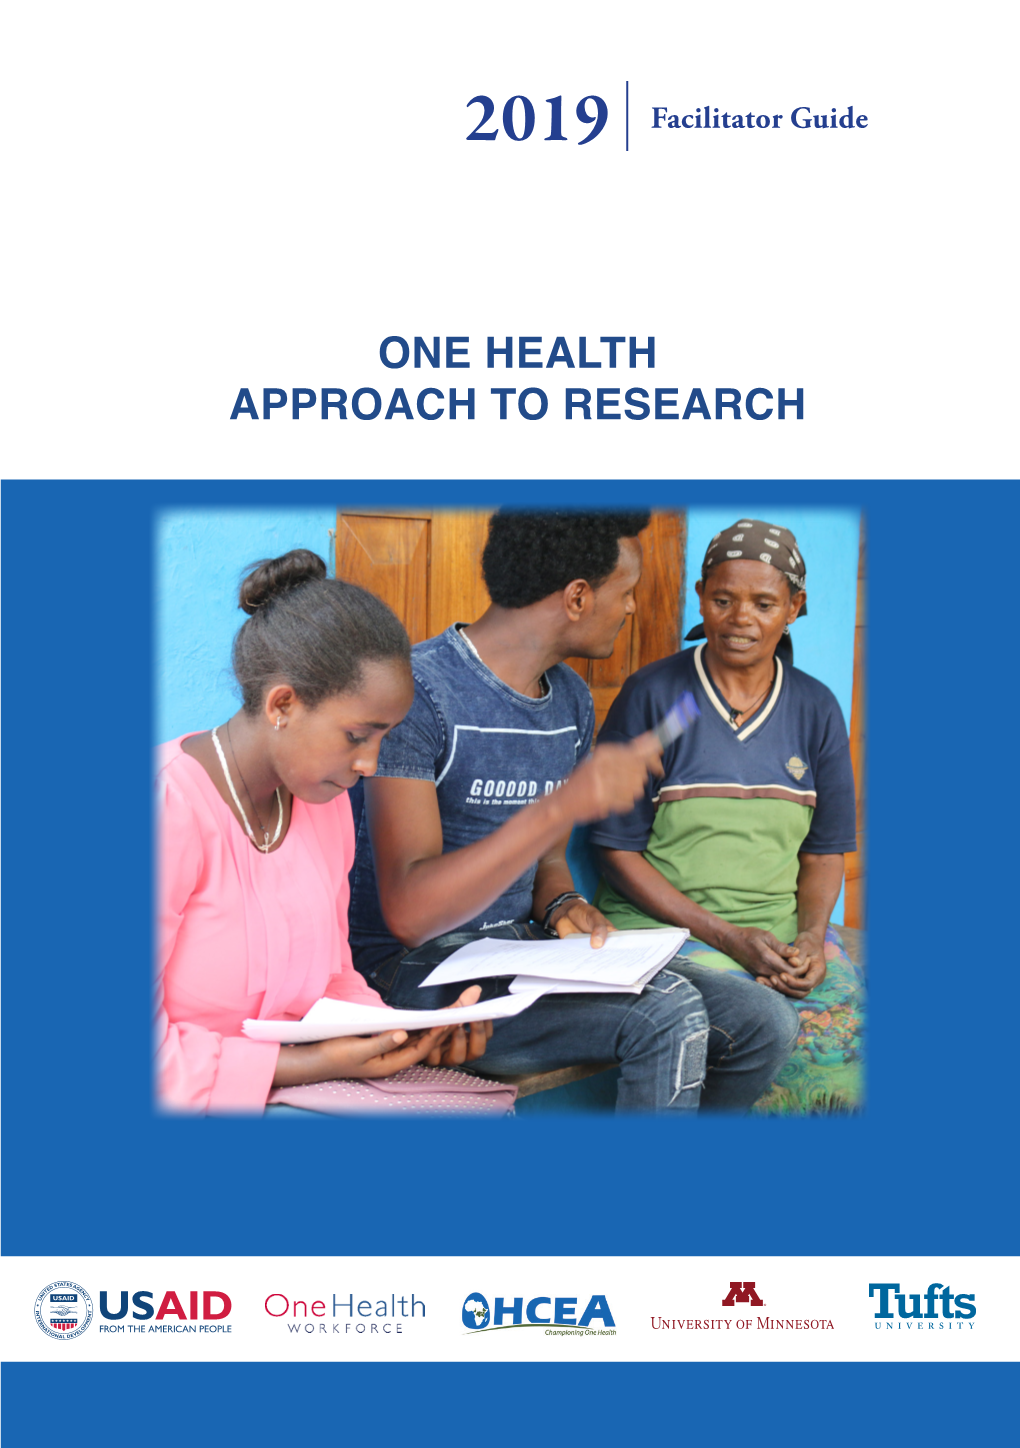 One Health Approach to Research